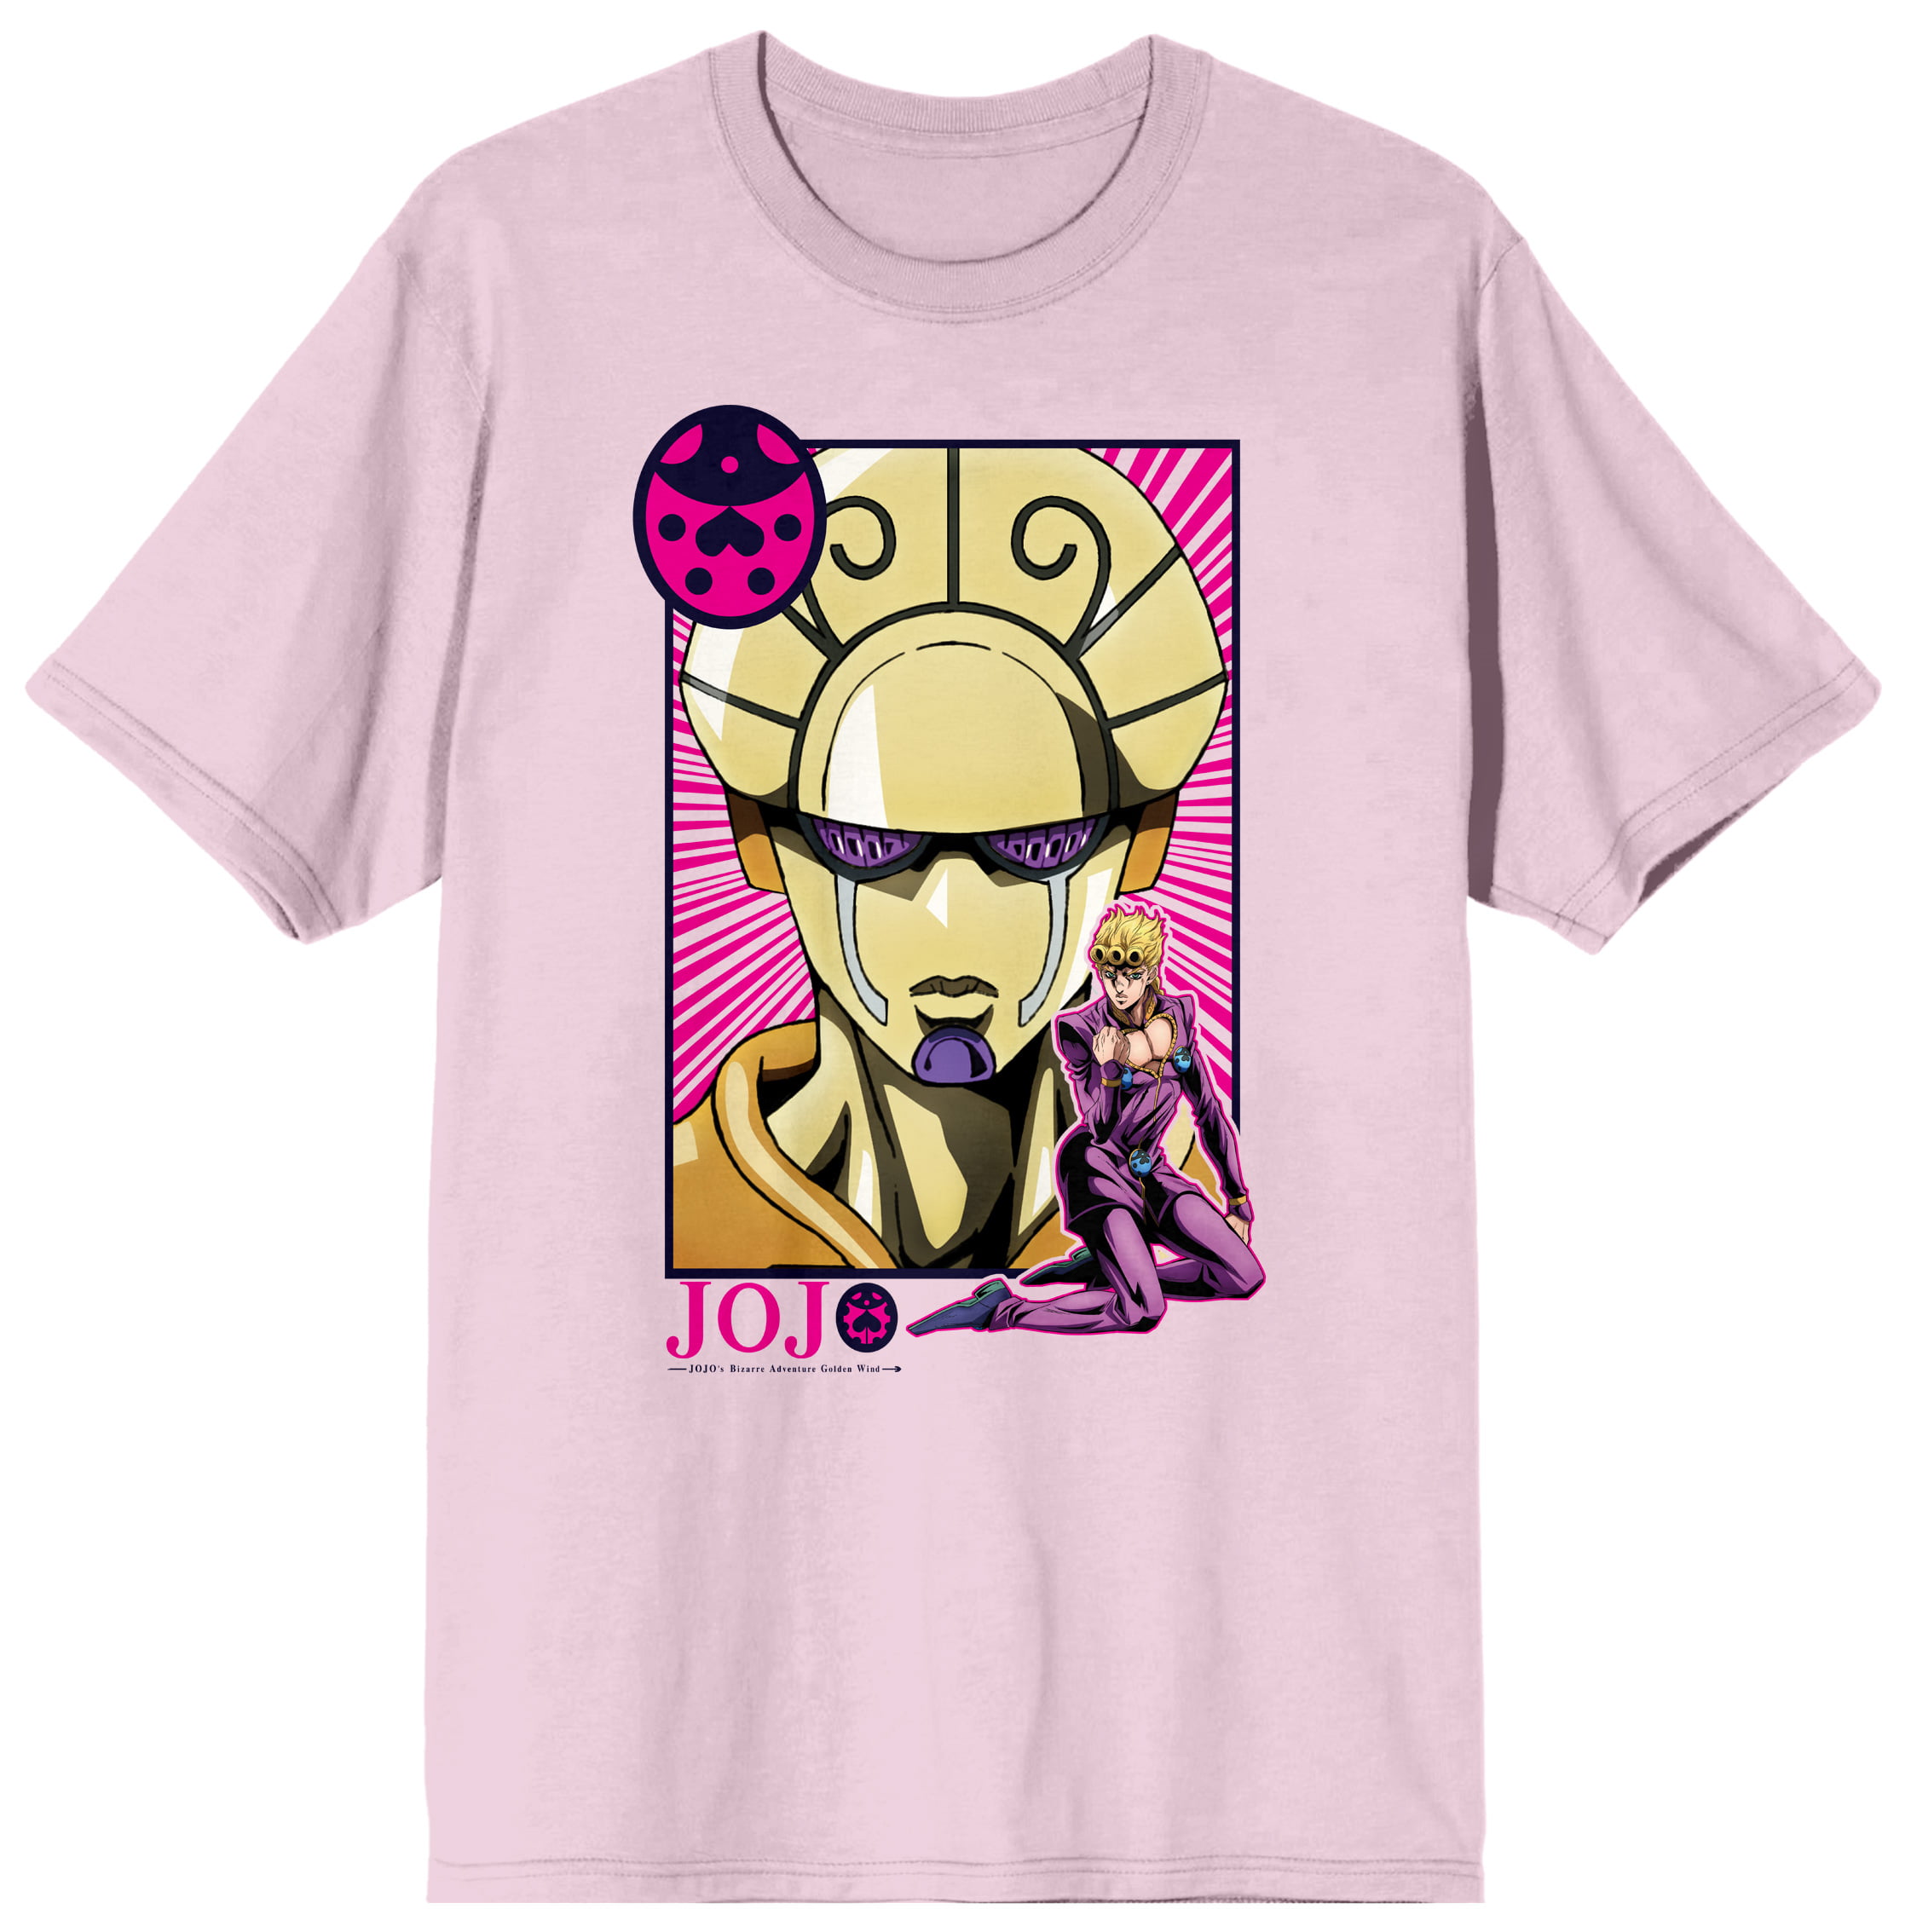 JoJos Bizarre Adventure Golden Wind Takes Over Tower Records This July   OTAQUEST